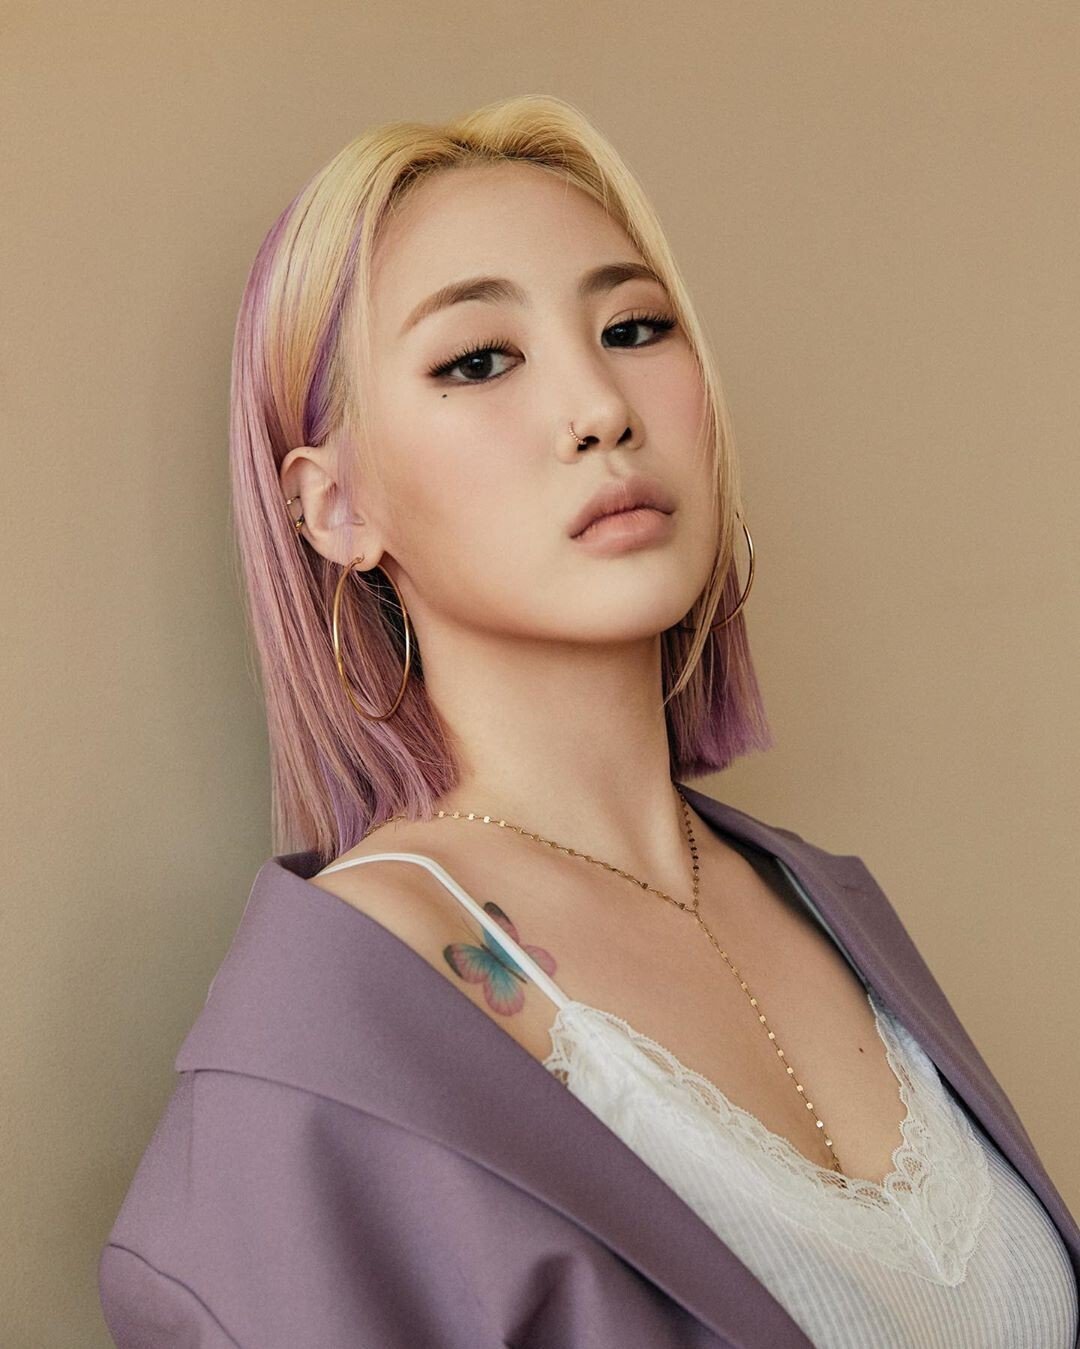 Covid-19 wasn’t enough to slow down K-pop star Jamie Park, AKA Park Ji-min – who spent the year prepping a new album and single and appearing on competition show Good Girl. Photo: @jiminxjamie/Instagram